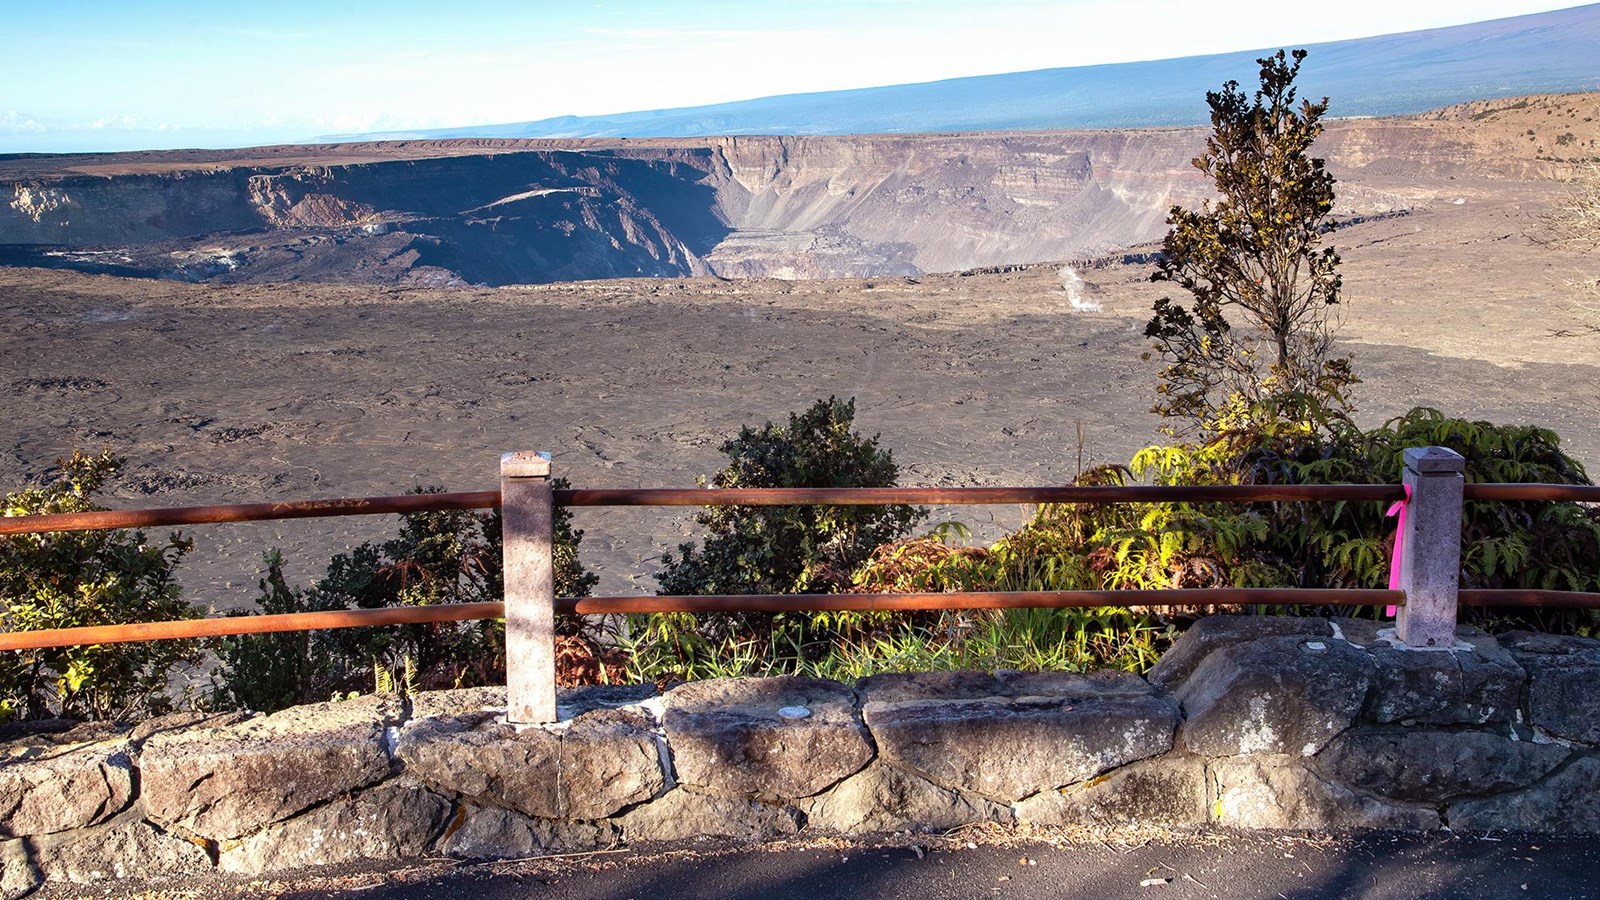 A volcanic caldera from behind an overlook fence